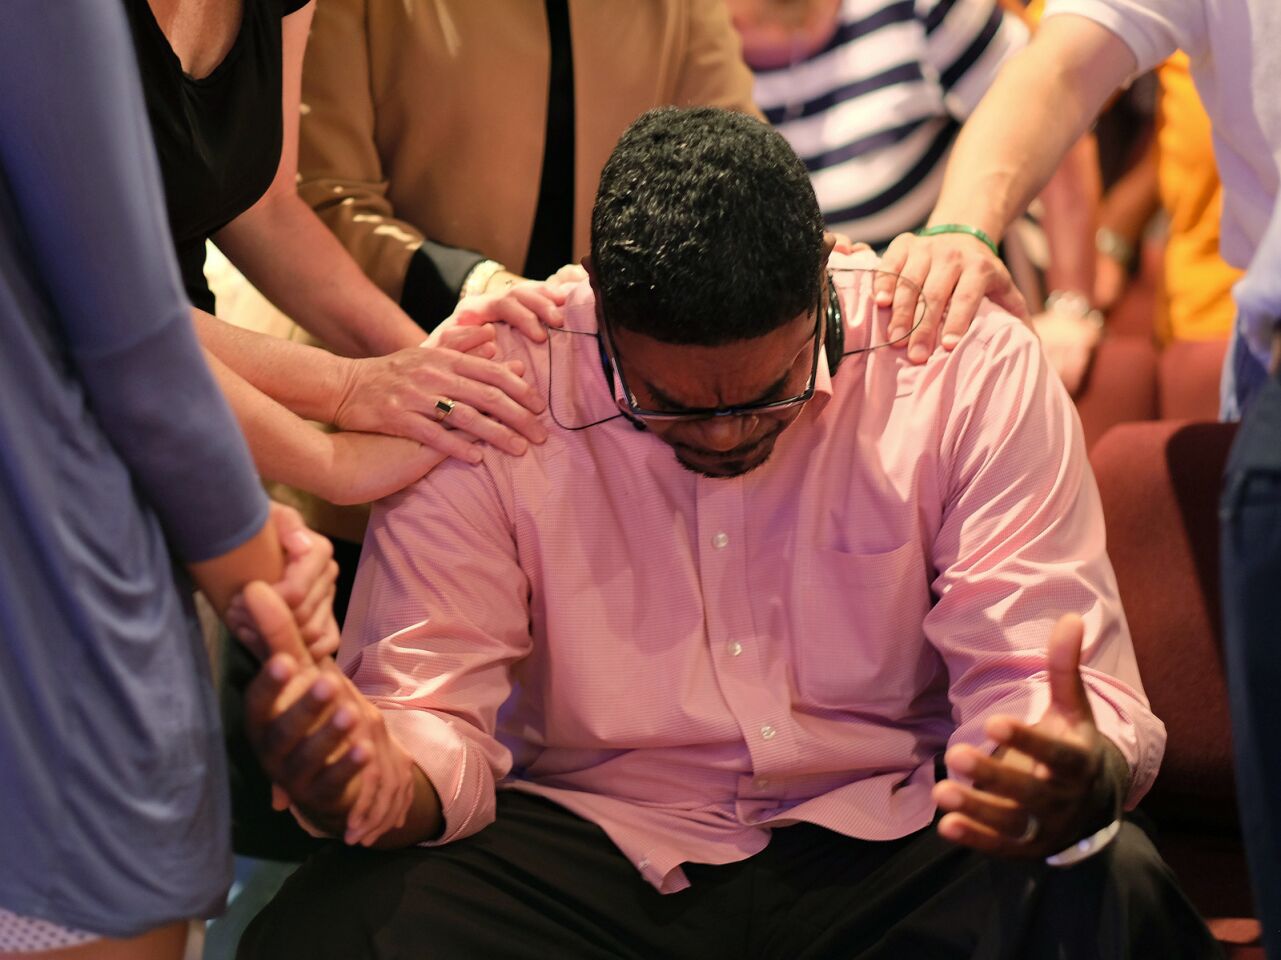 Keith McDaniel, pastor of Macedonia Missionary Baptist Church, is surrounded by others in prayer for the victims of Wednesday's shooting at Emanuel AME Church in Charleston, S.C.